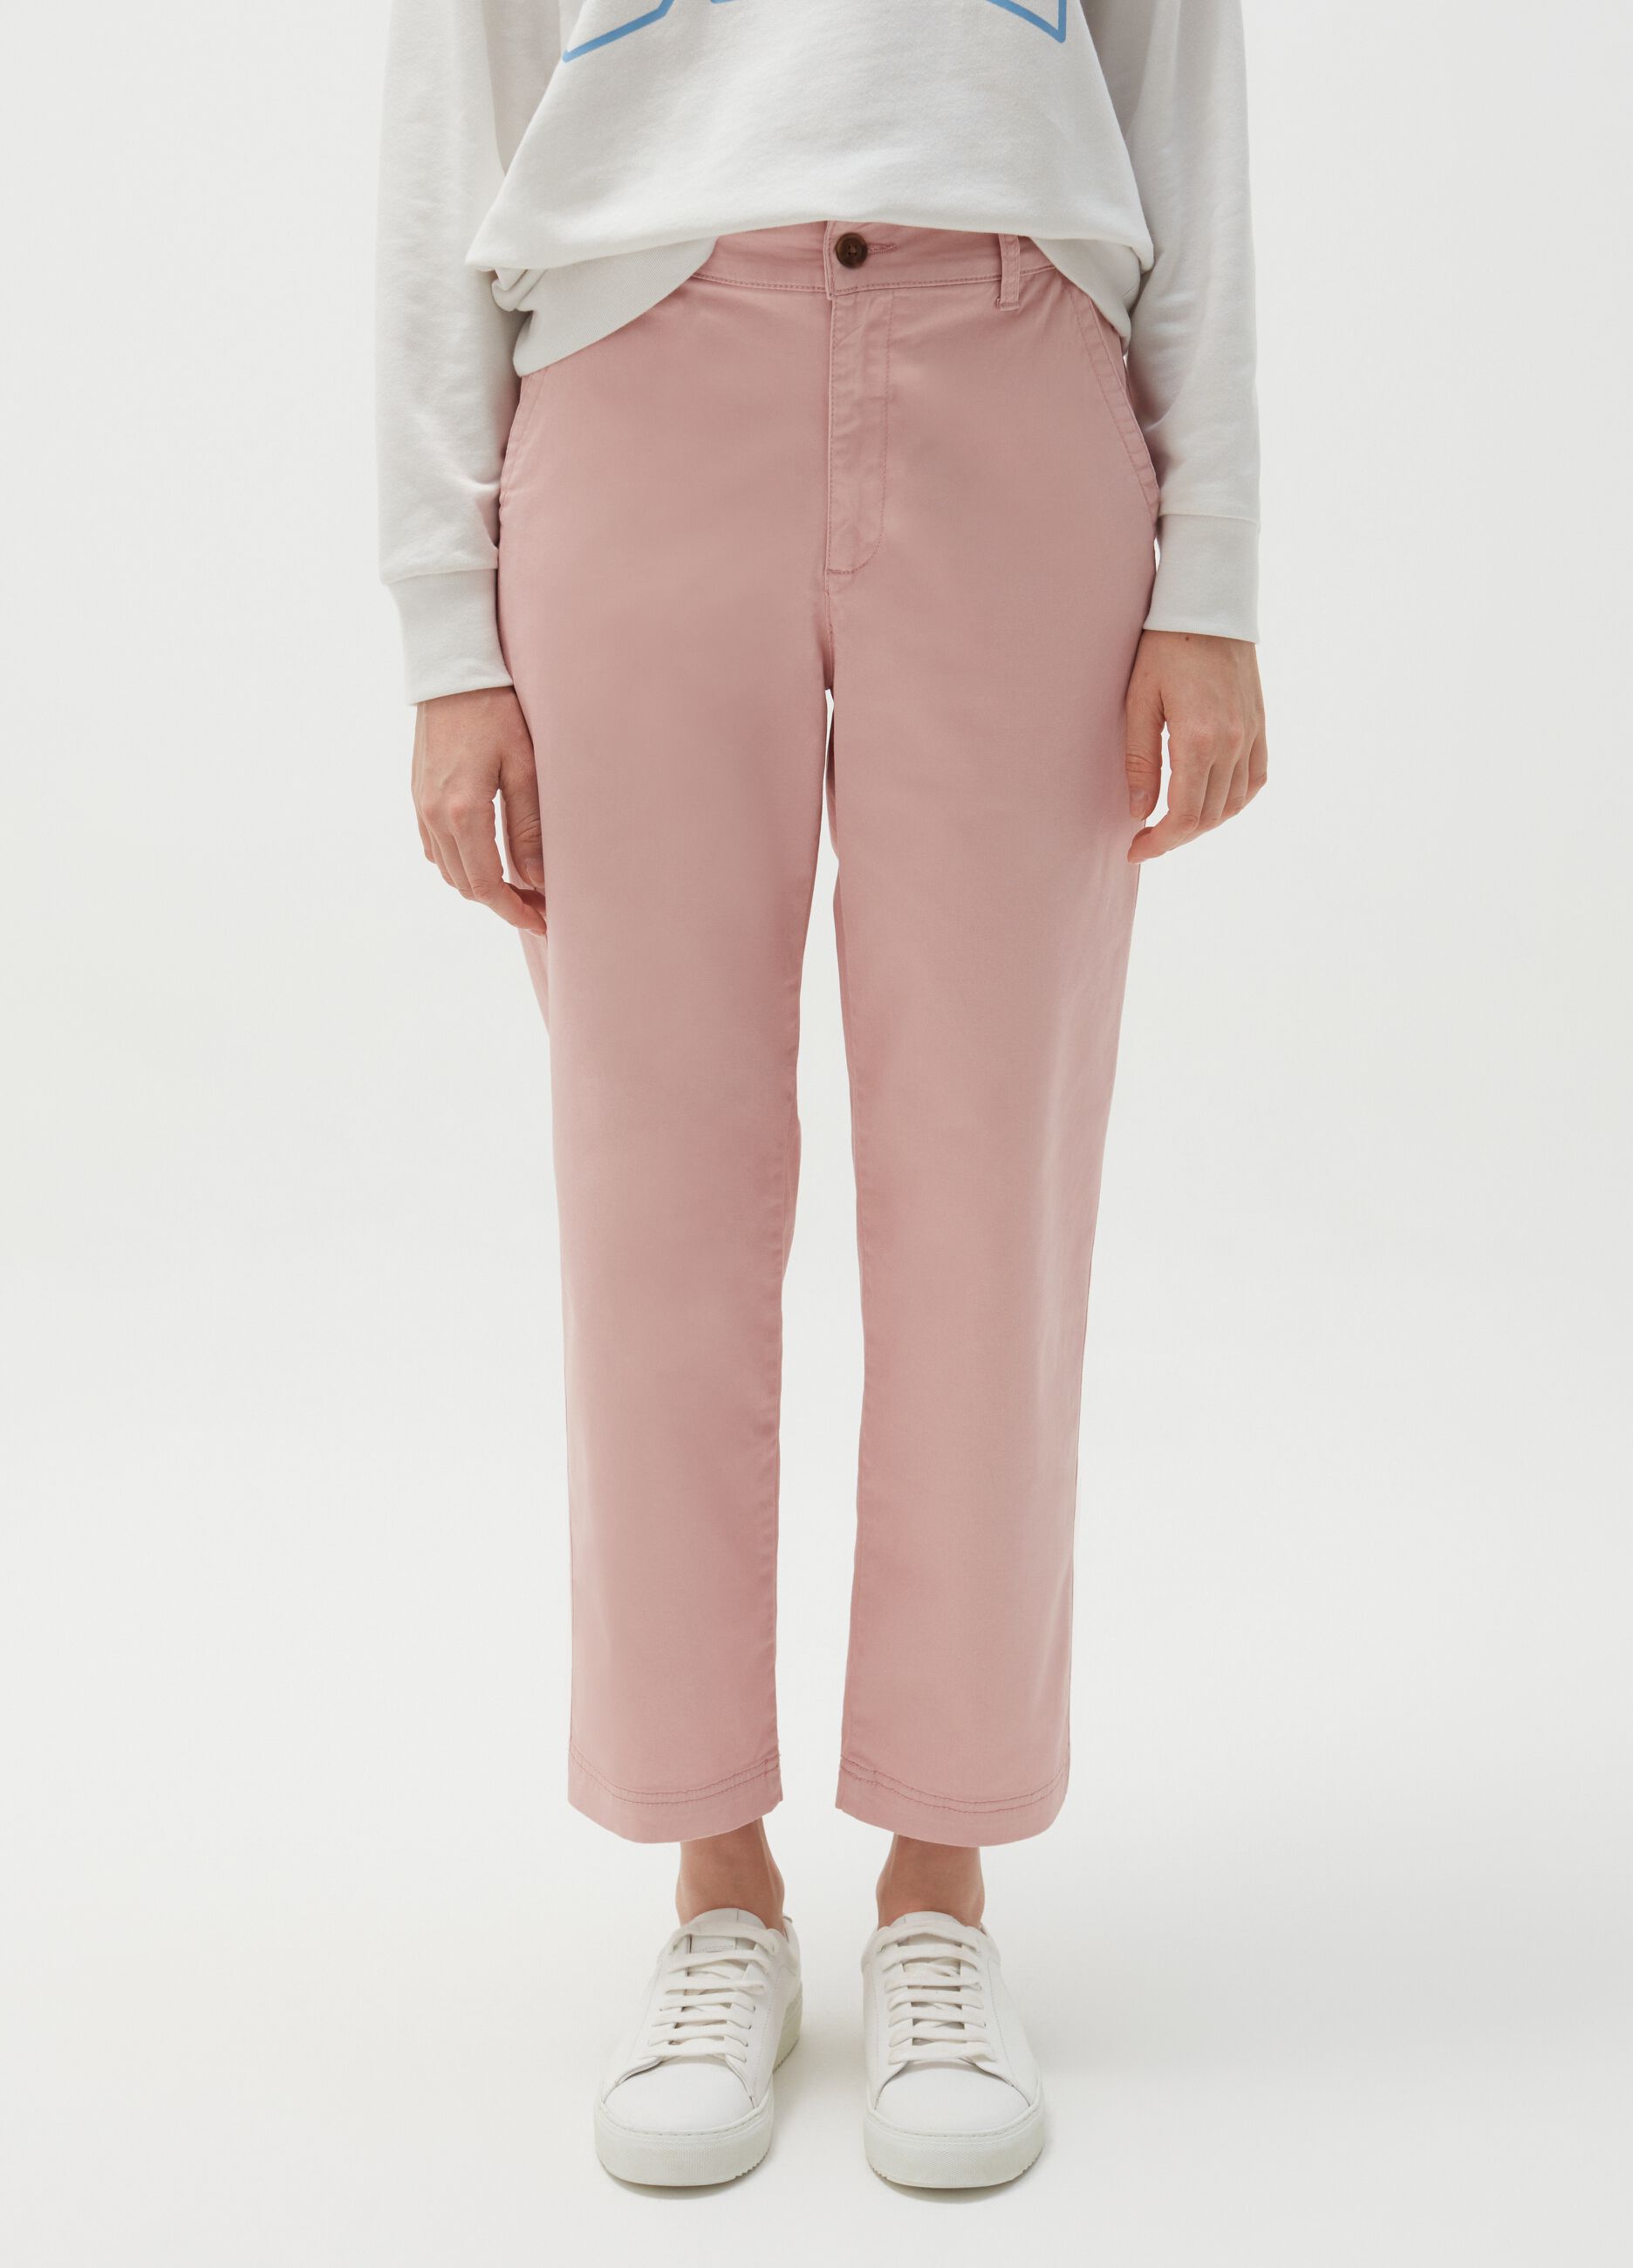 Girlfriend-fit cotton trousers